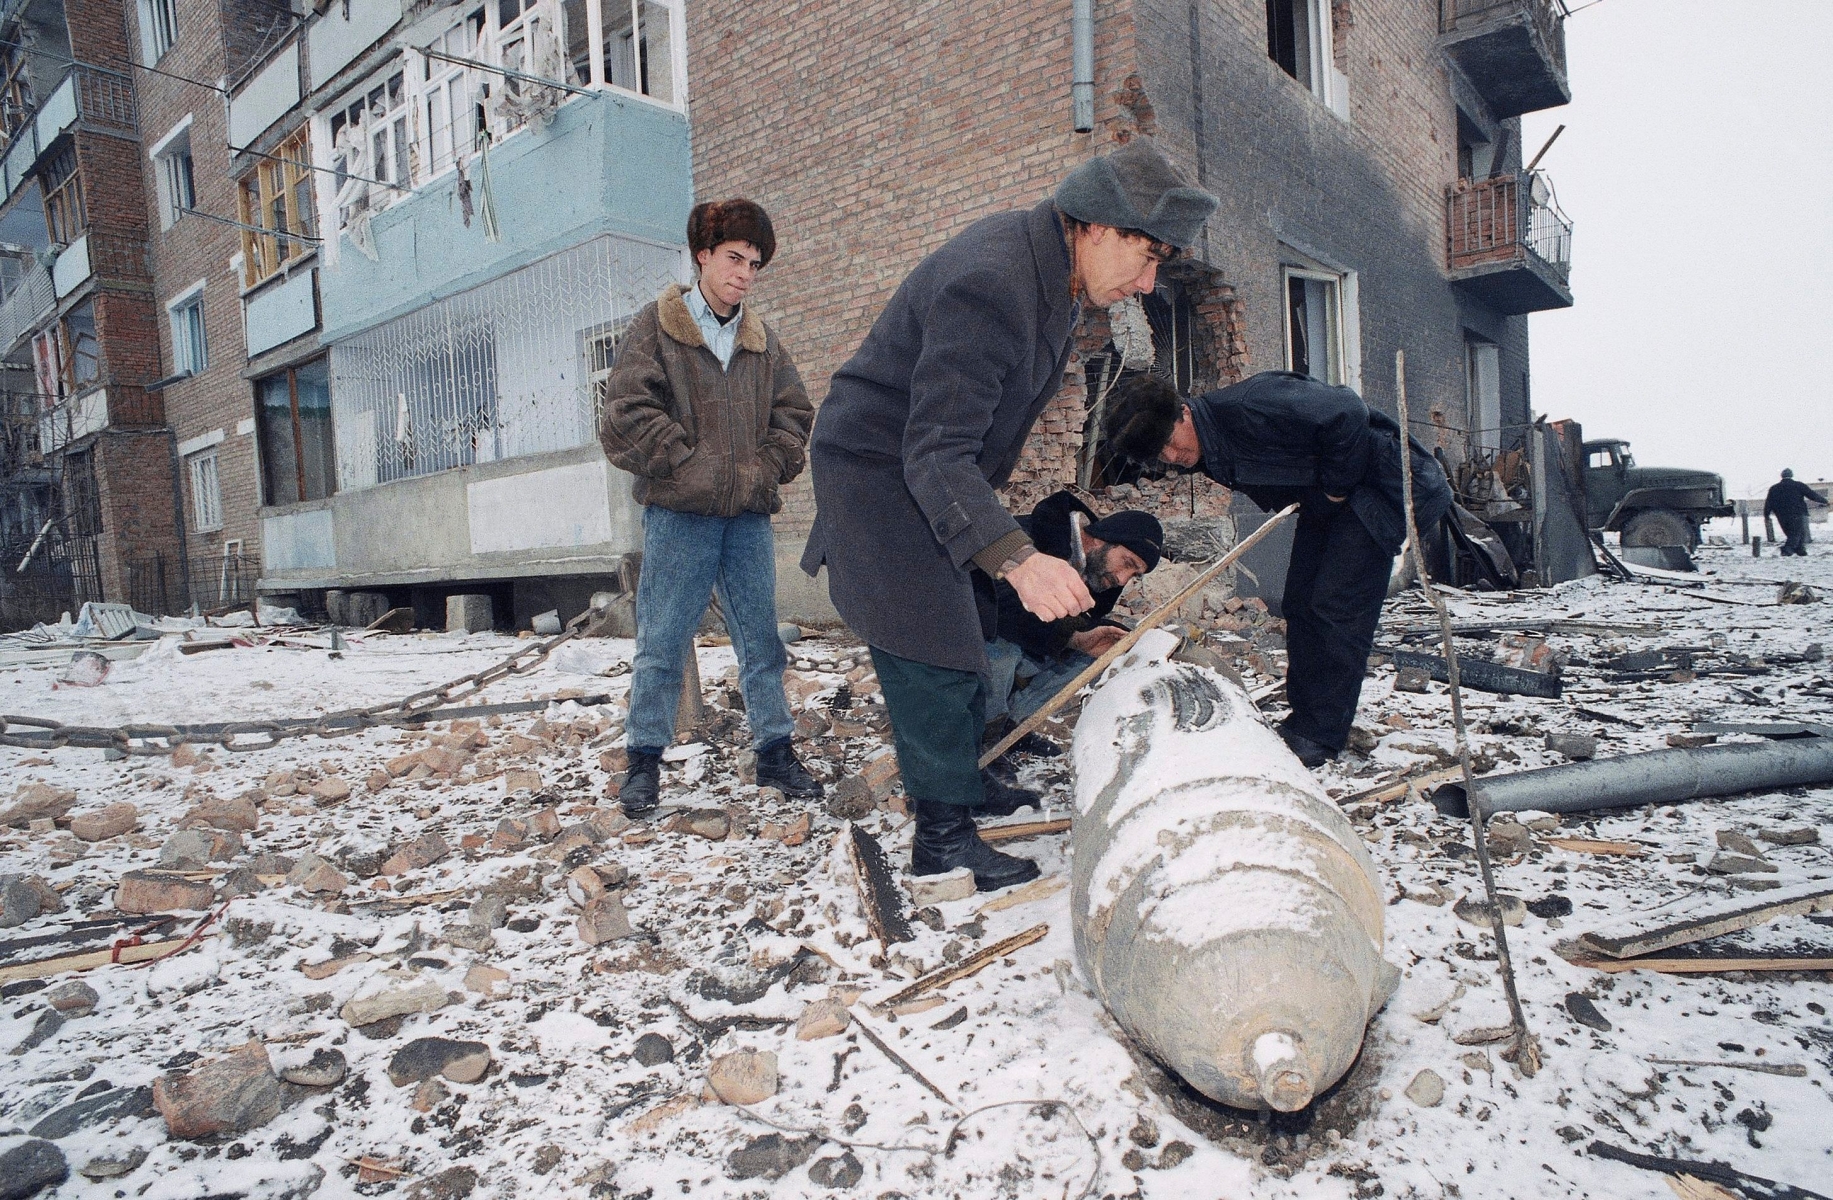 Chechen men look at an un-exploded Russian bomb near their house in Argun, 9 miles (15 km) East of Grozny, in the break-away republic of Chechnya, after the latest air-raid by Russian forces, Saturday, Dec. 24, 1994 in Russia. (AP Photo/Alexander Zemlianichenko) RUSSLAND TSCHETSCHENIEN KRIEG 1994